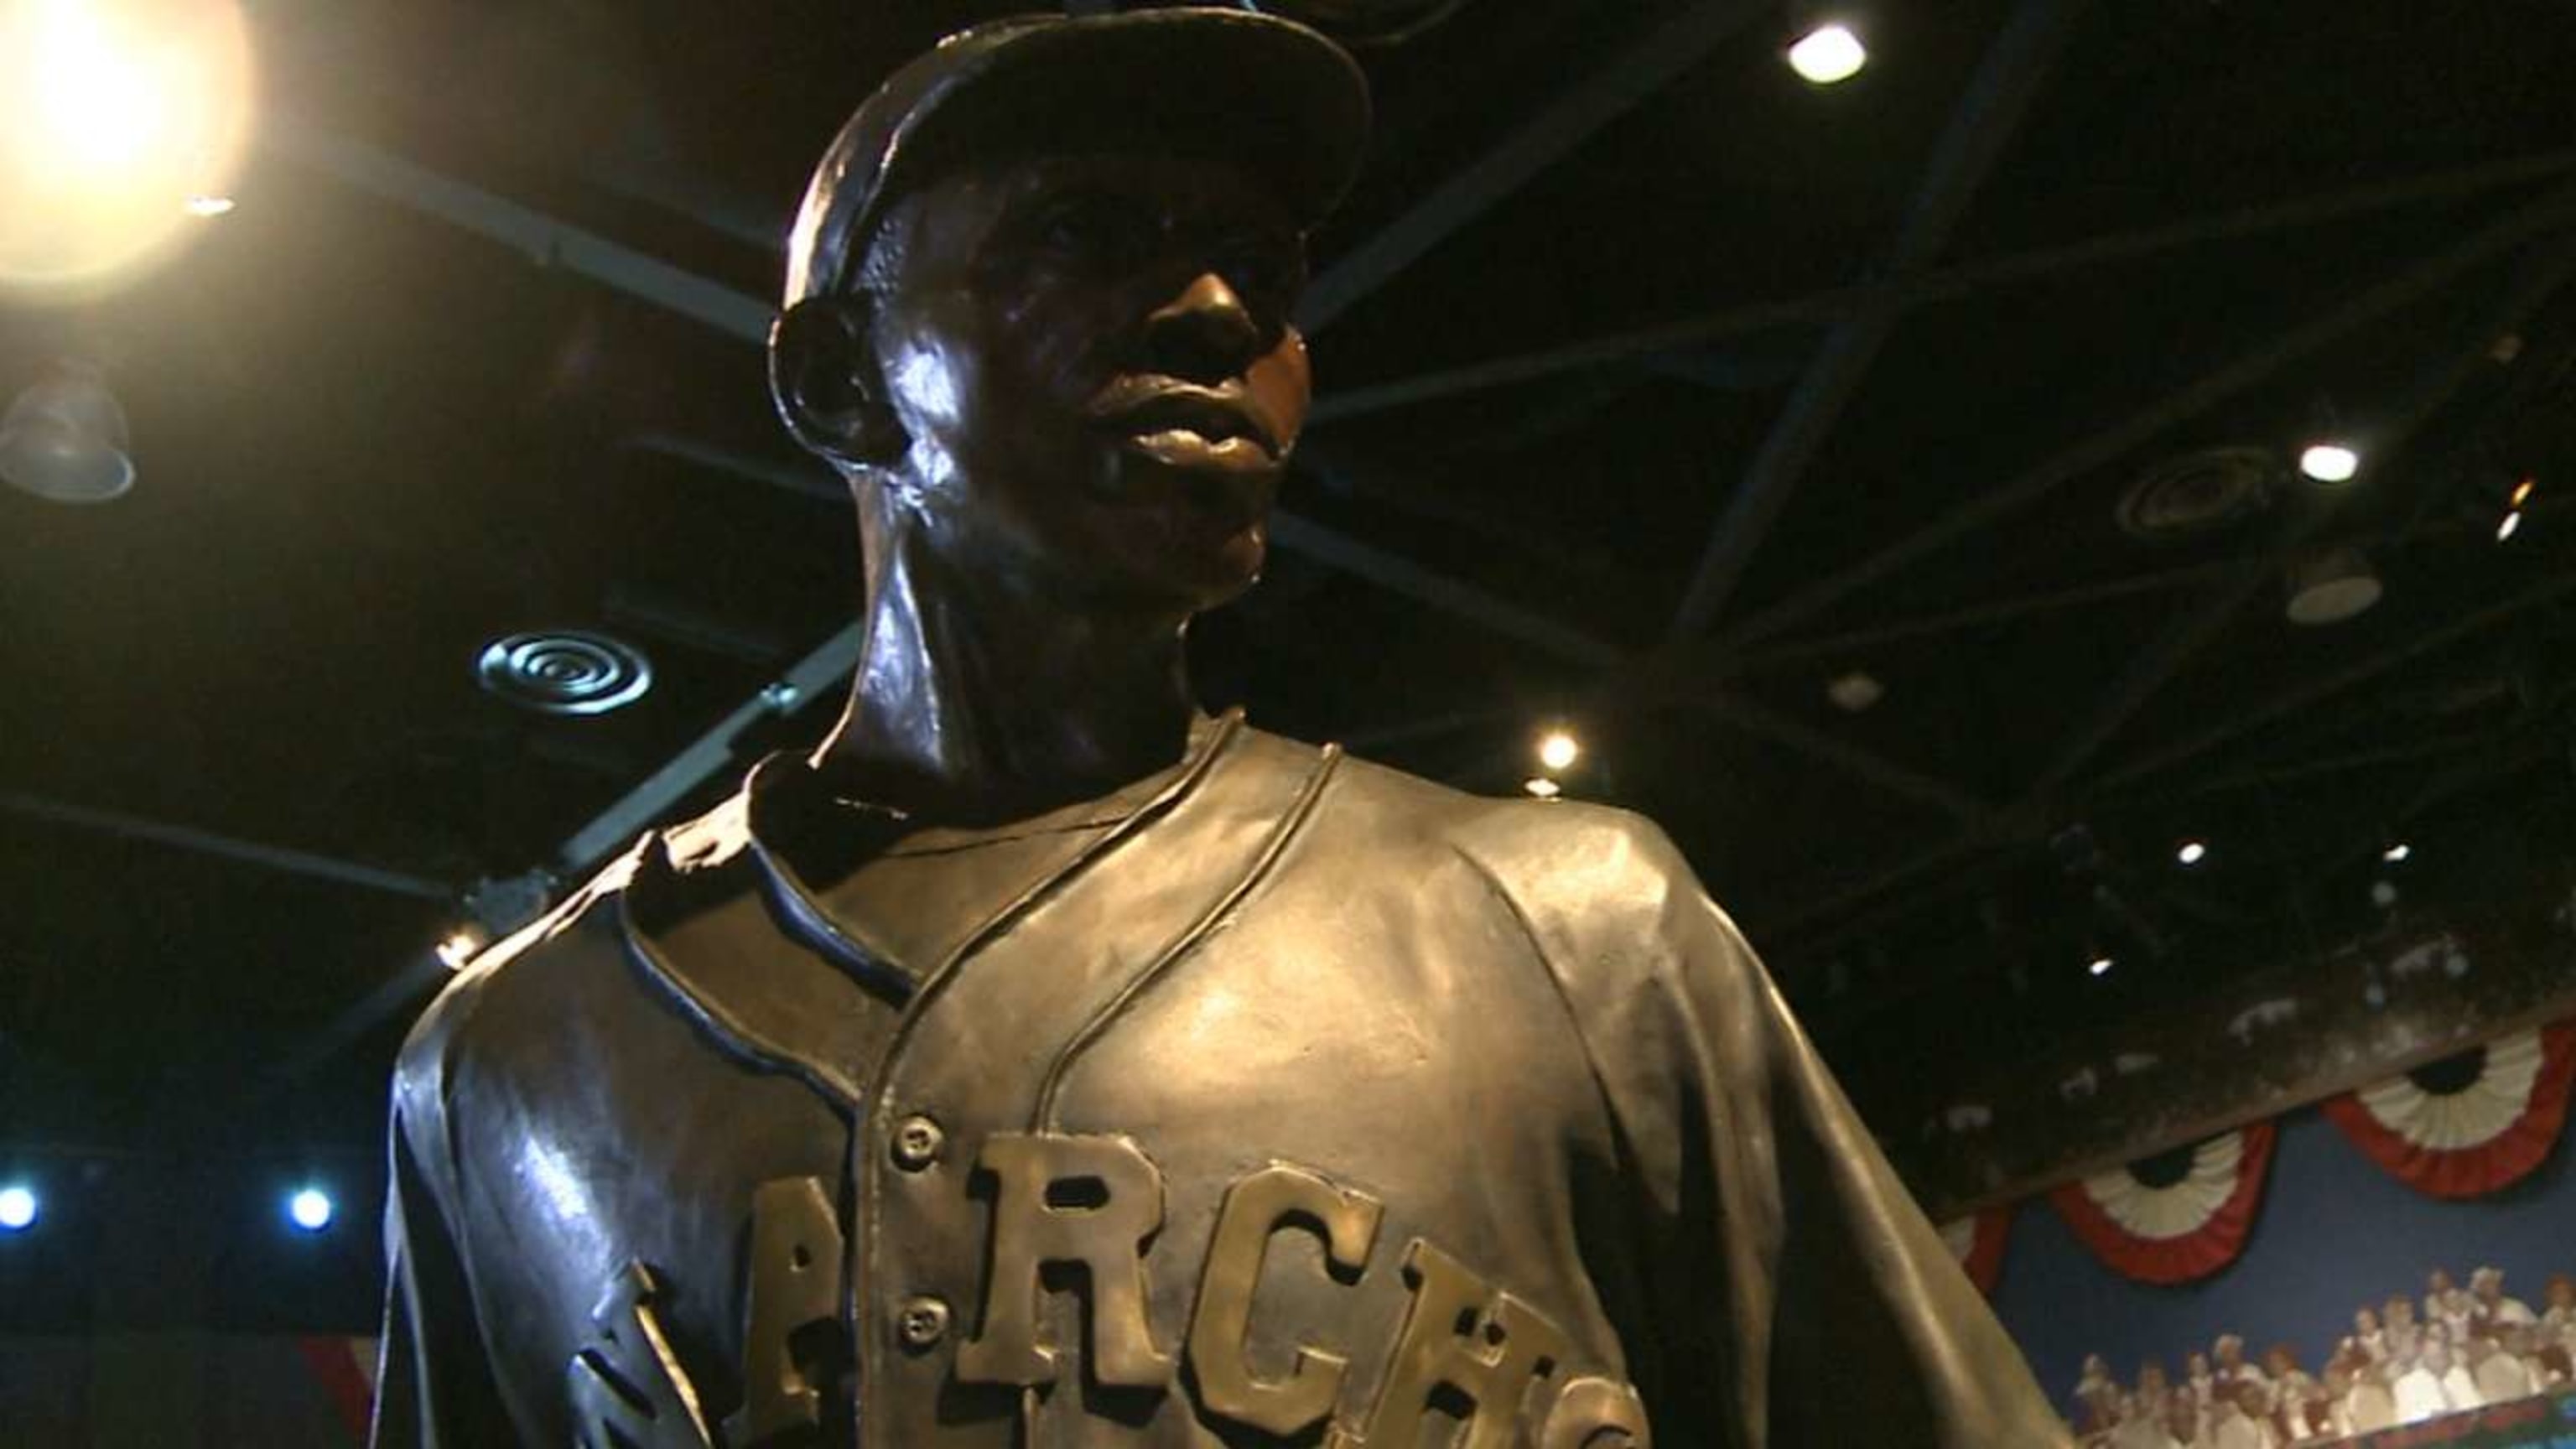 Preserving the Negro League's legacy